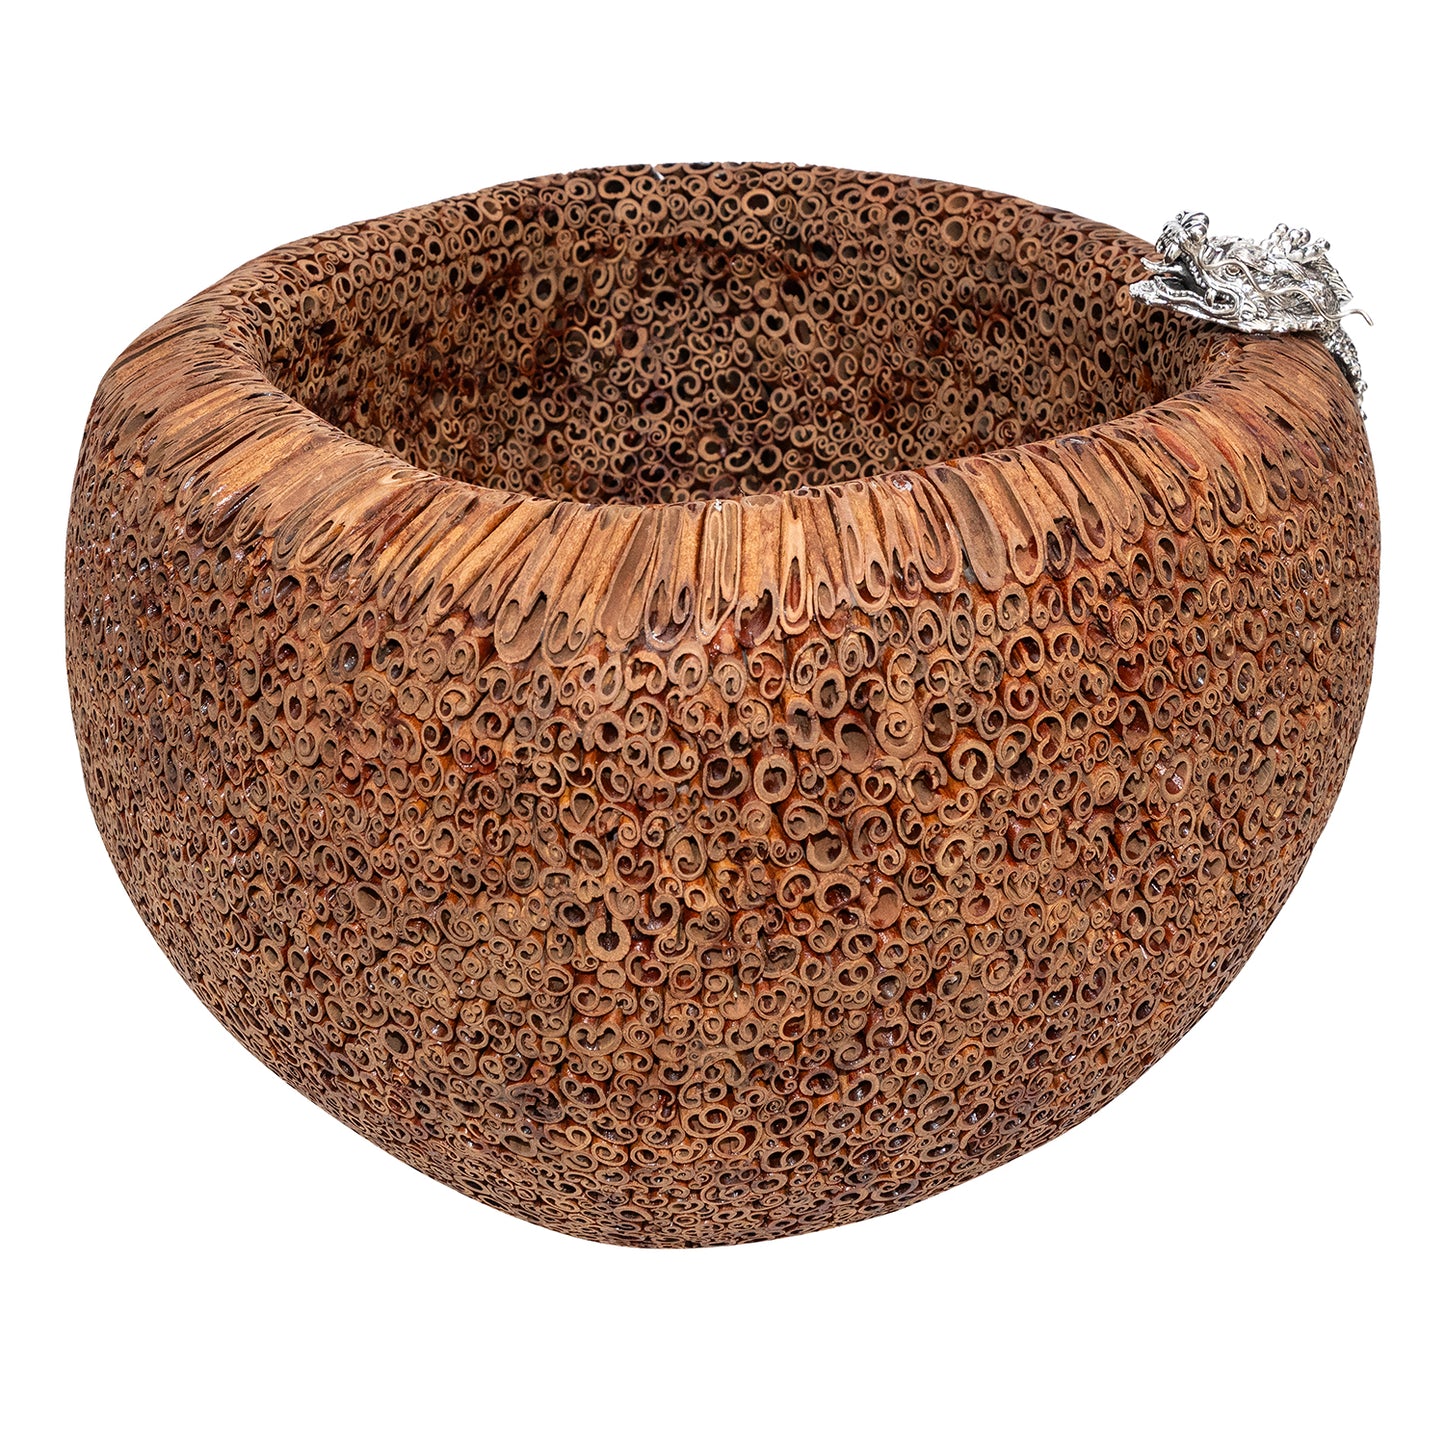 Cinnamon Bowl with Swirling Silver Dragon #S